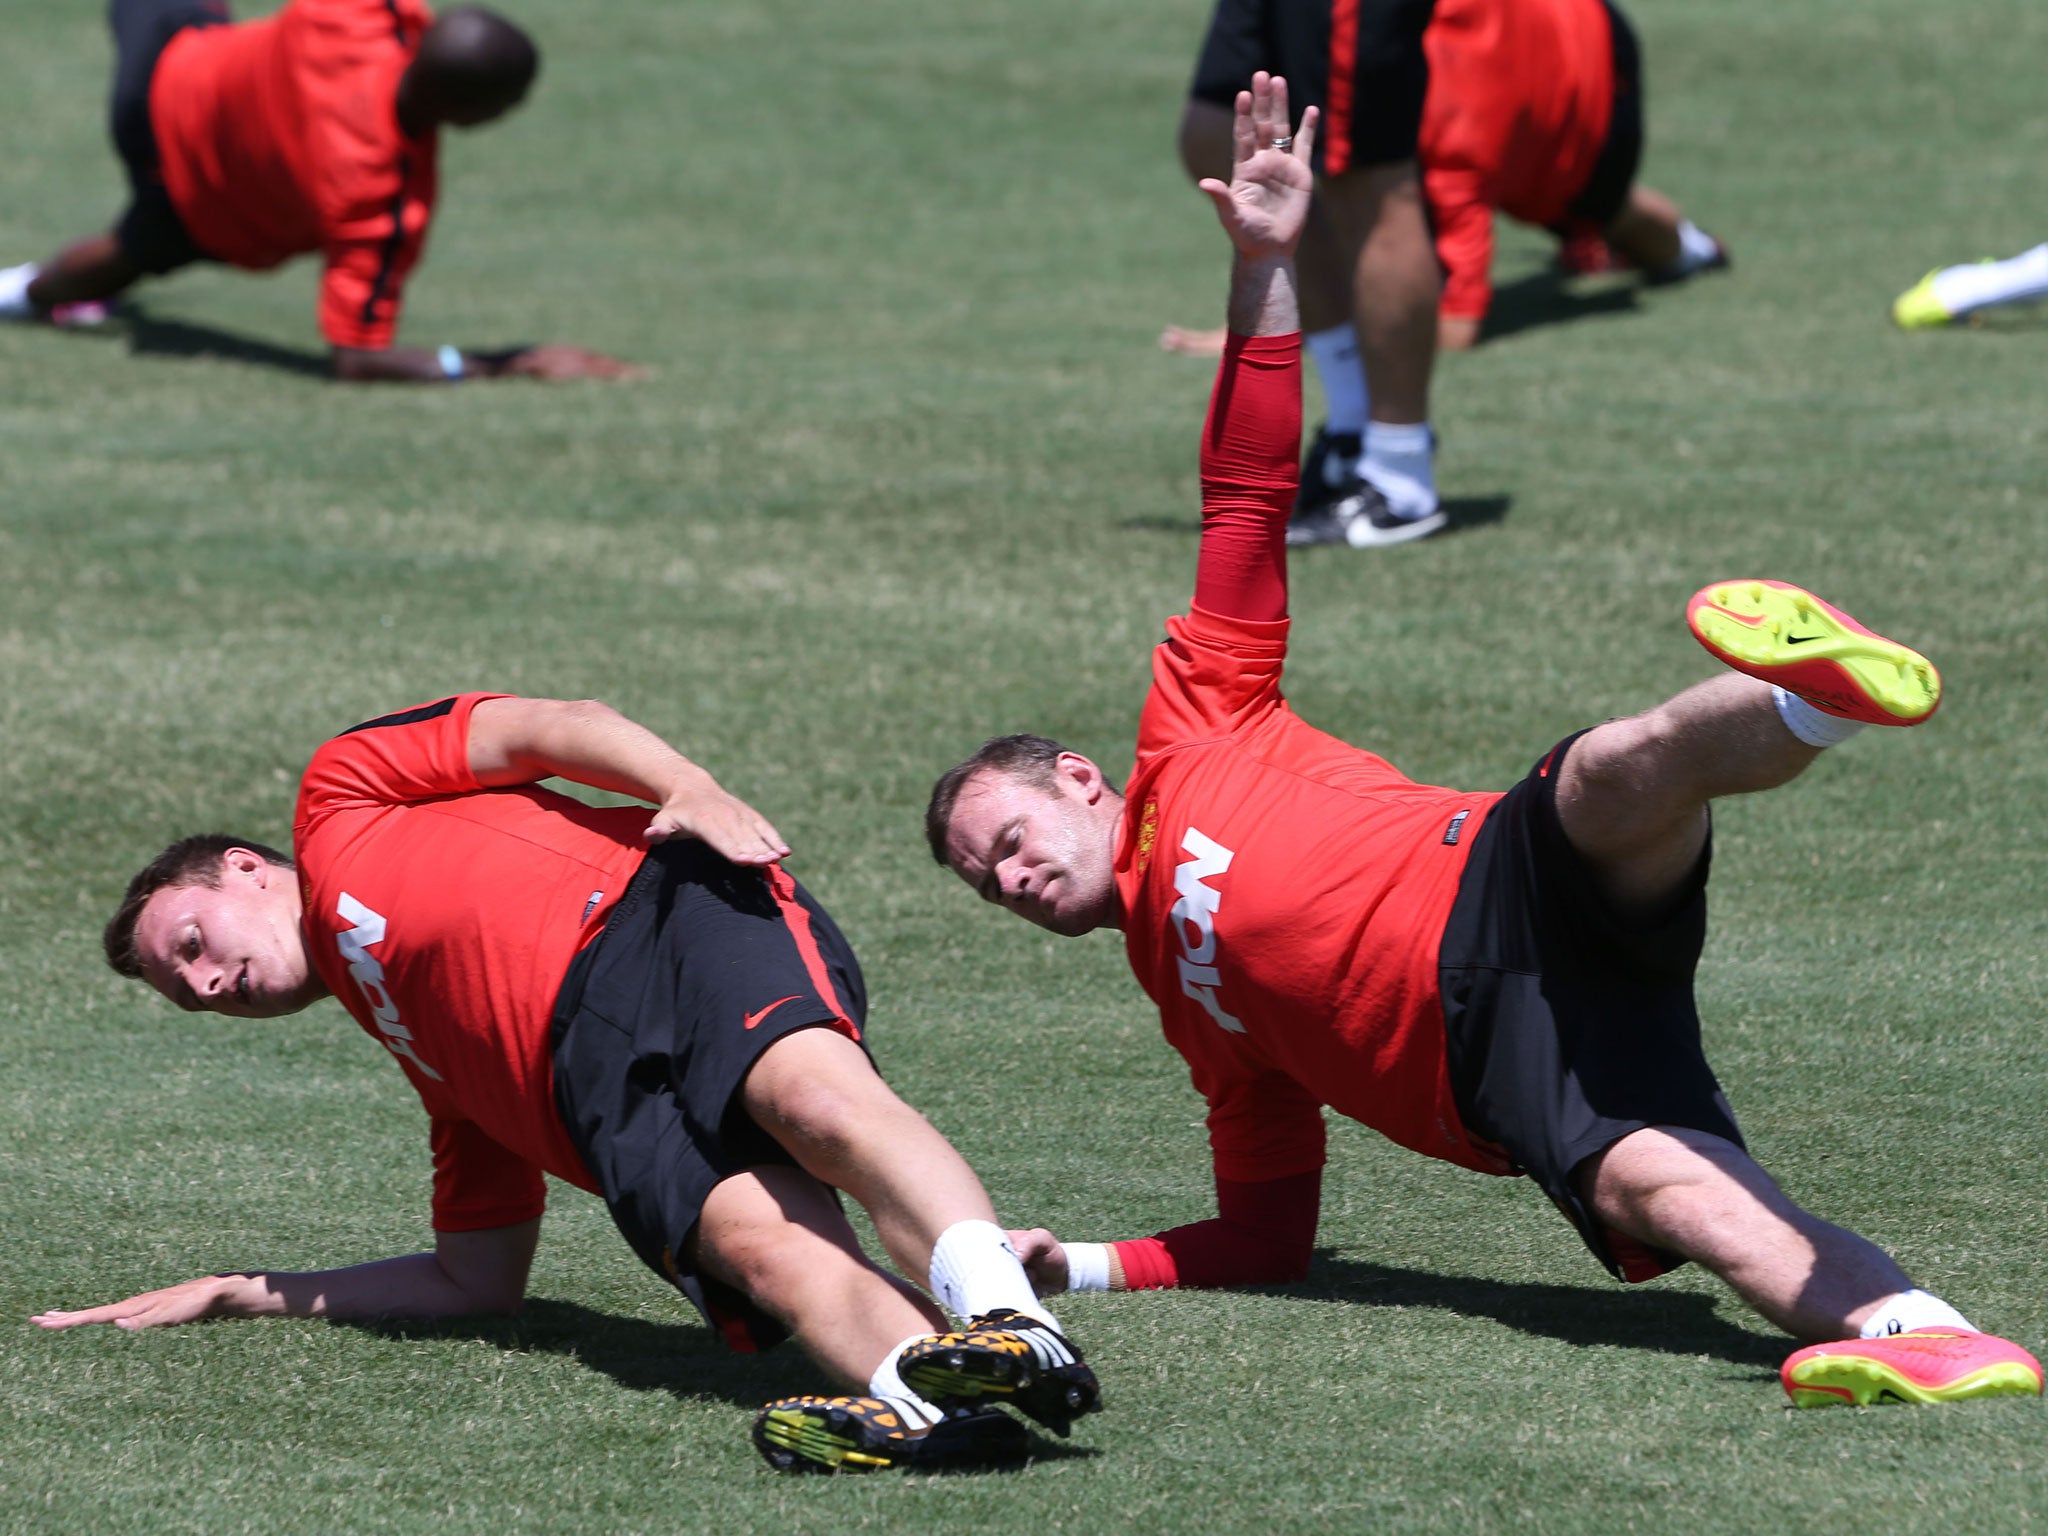 Wayne Rooney trains alongside the rest of the Manchester United squad in the United States